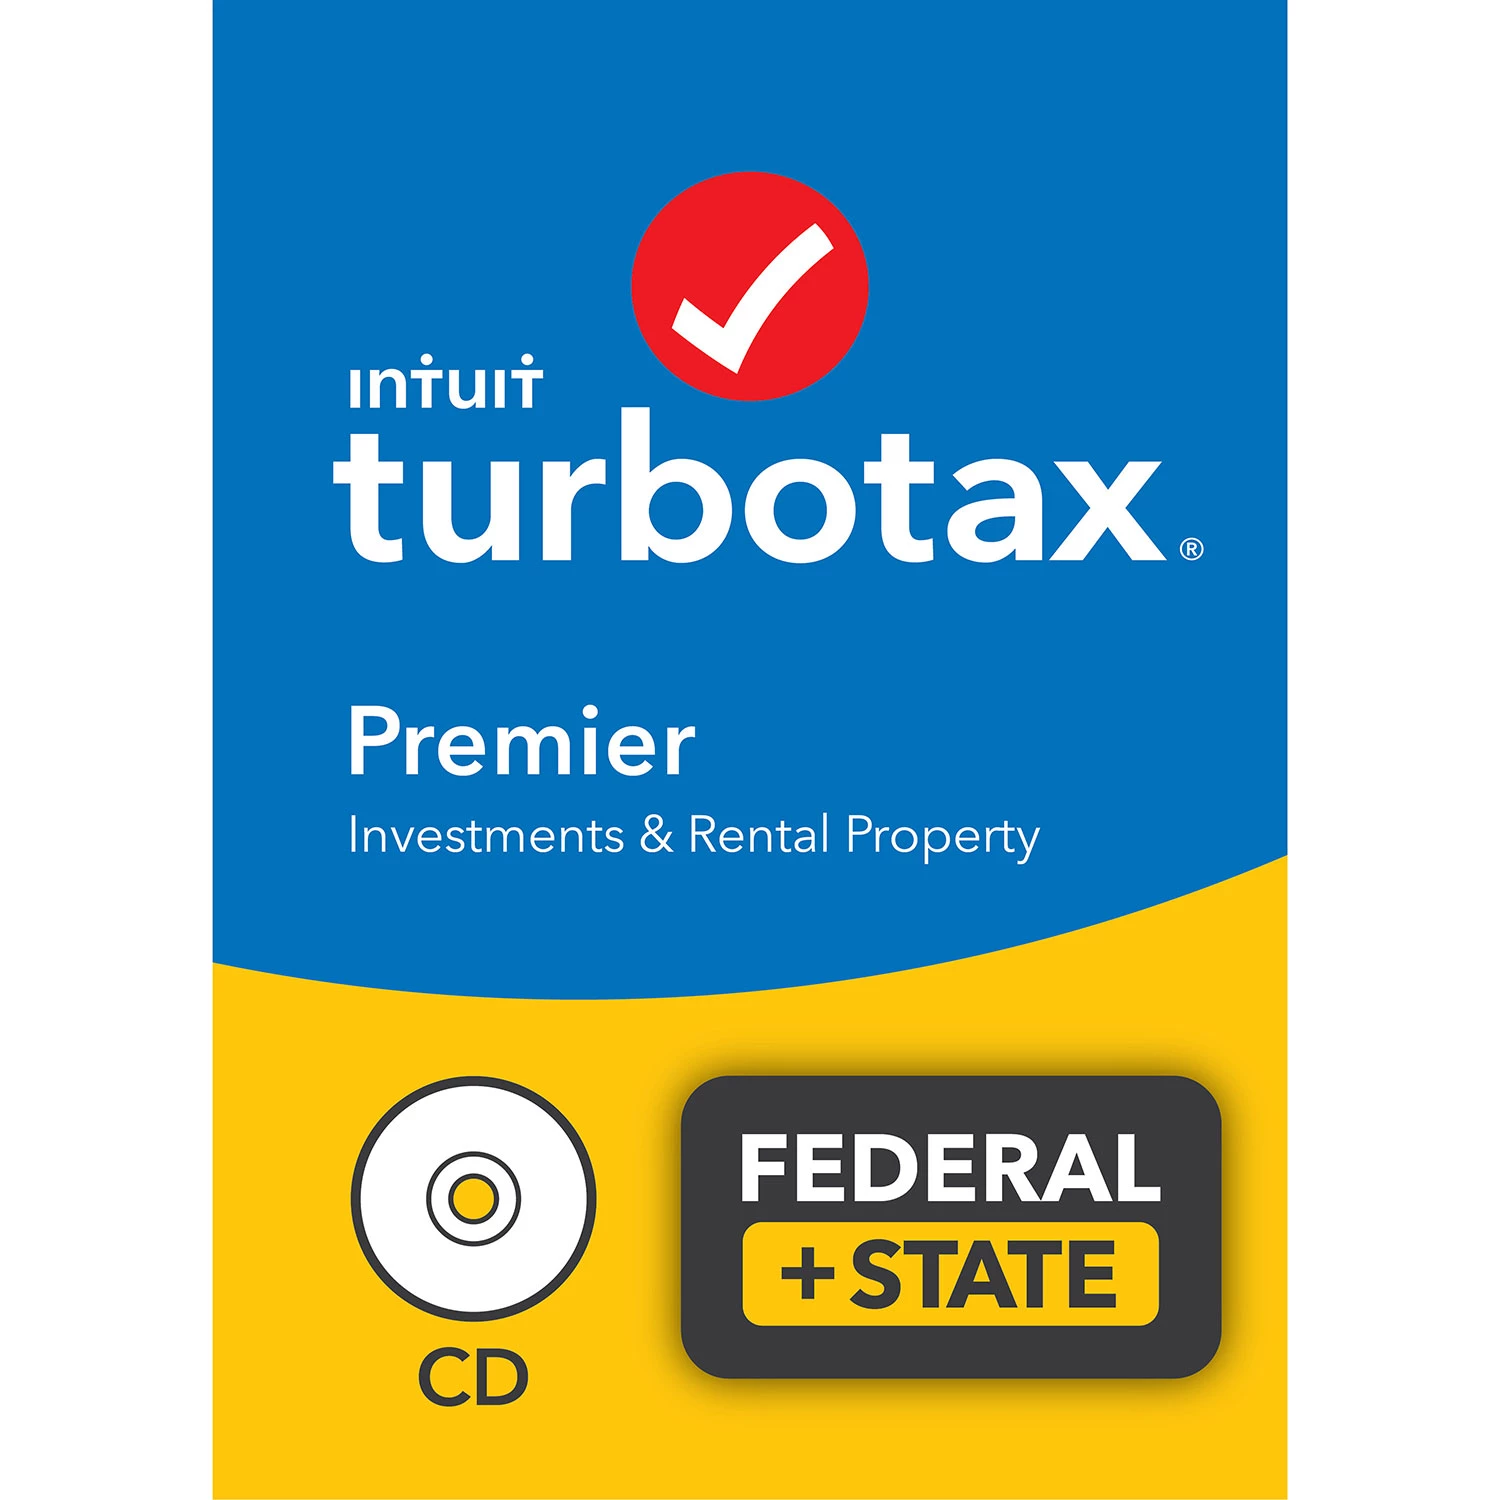 Free TurboTax Premier for some Fidelity customers ($69 value)